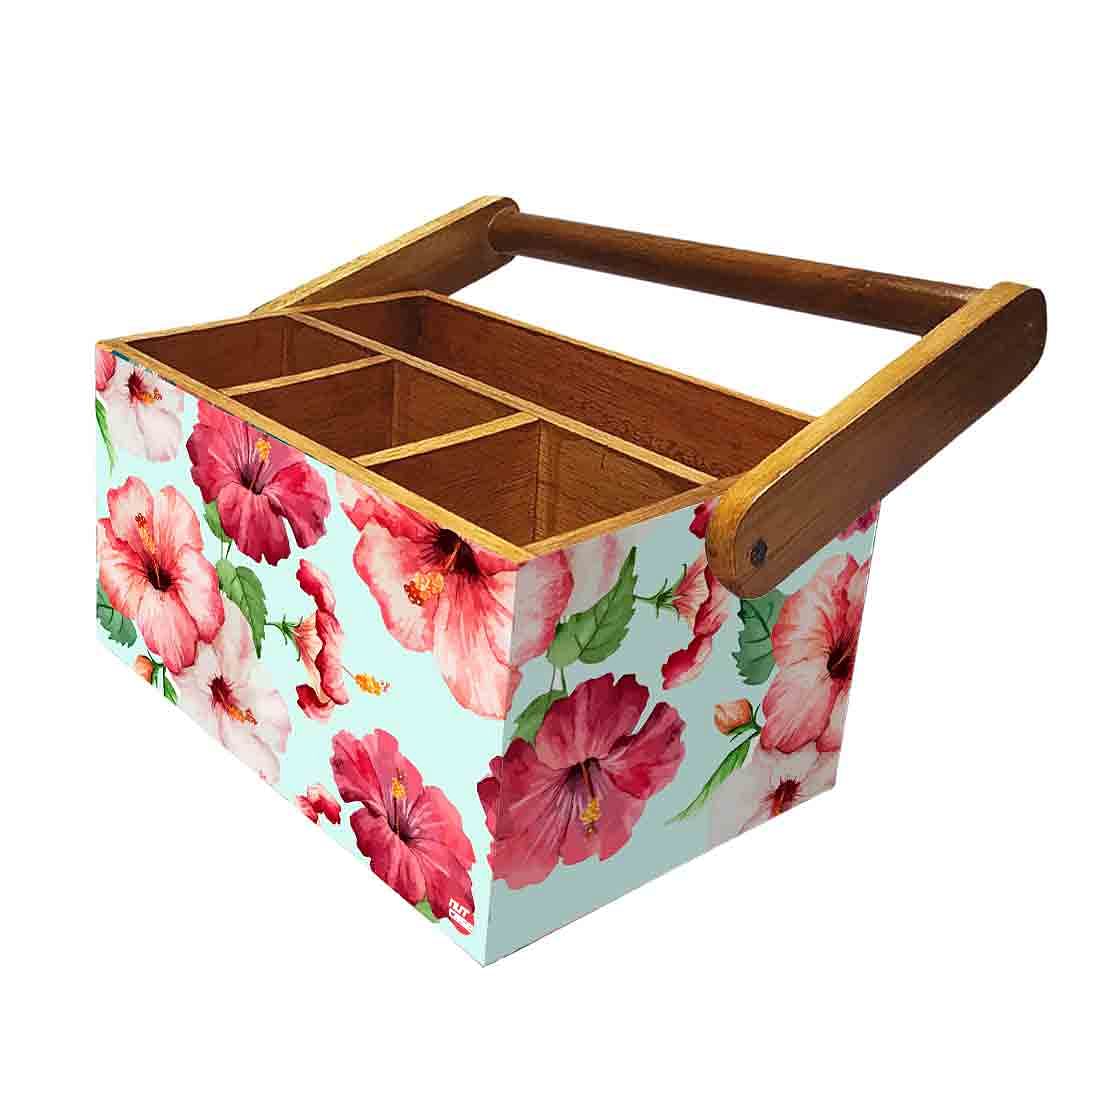 Cutlery and Tissue Holder With Handle for Dining Table Organizer - Hibiscus Nutcase